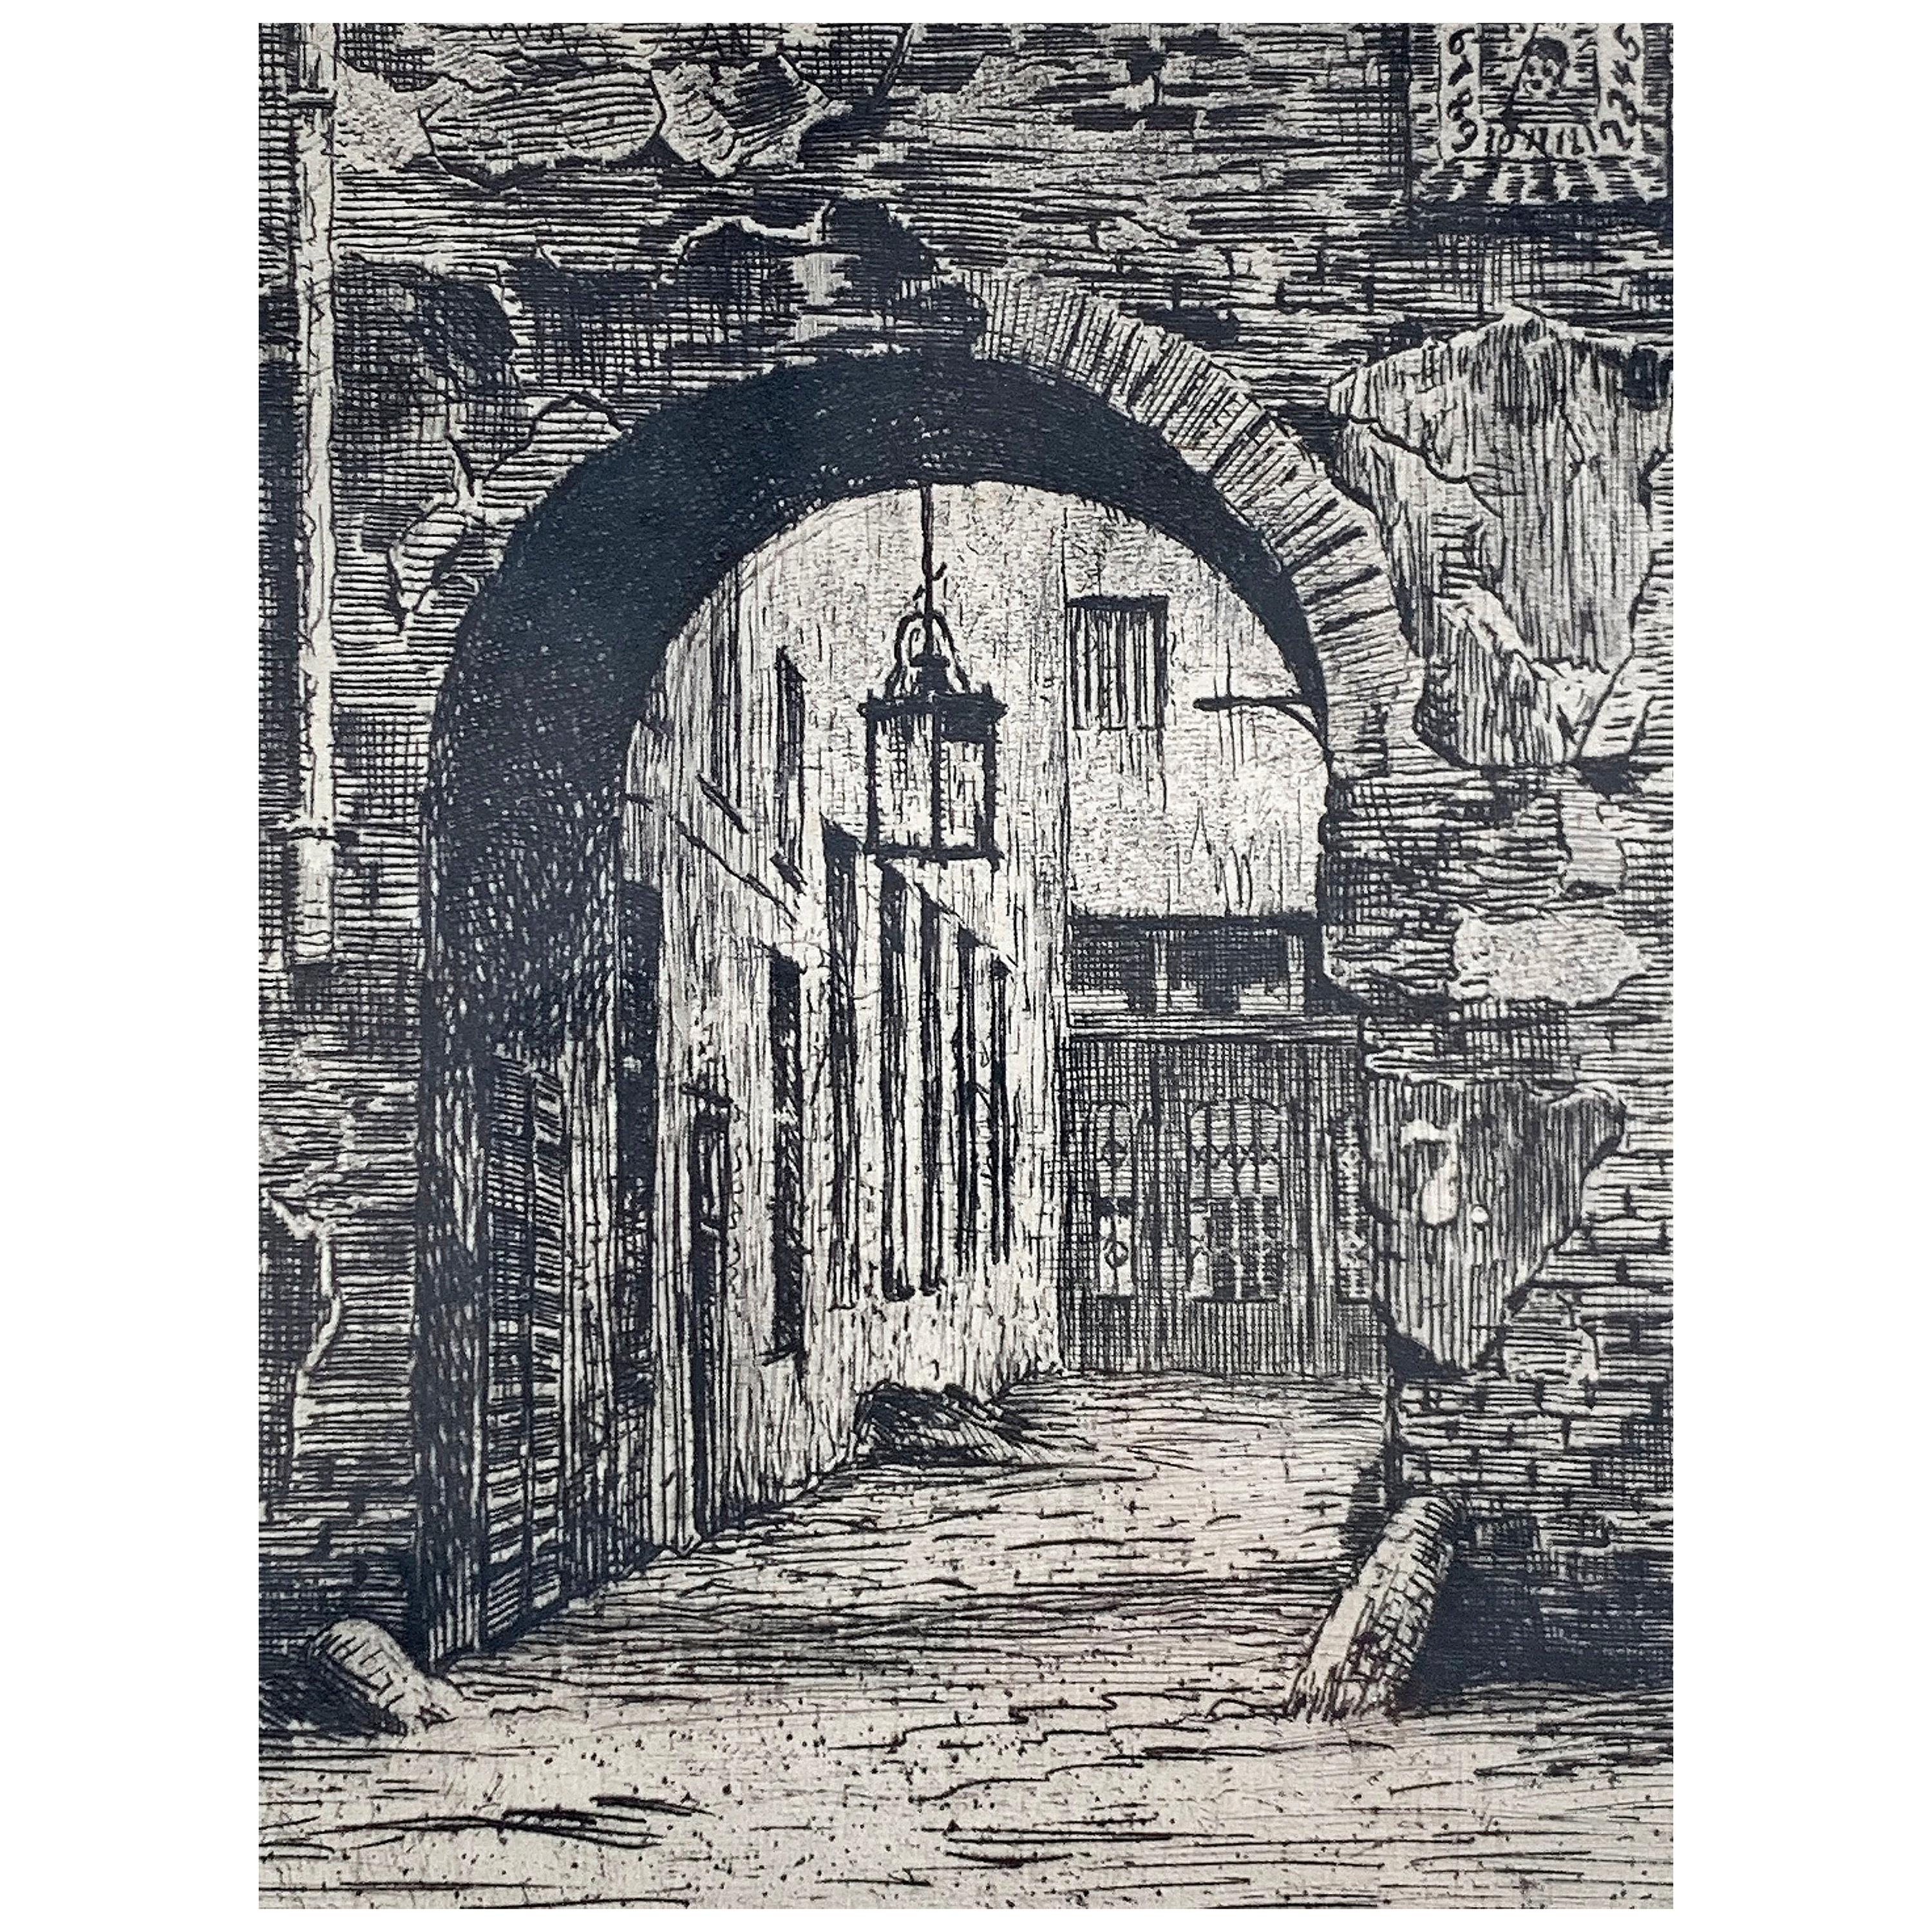 Lithograph Titled "Old Berlin"